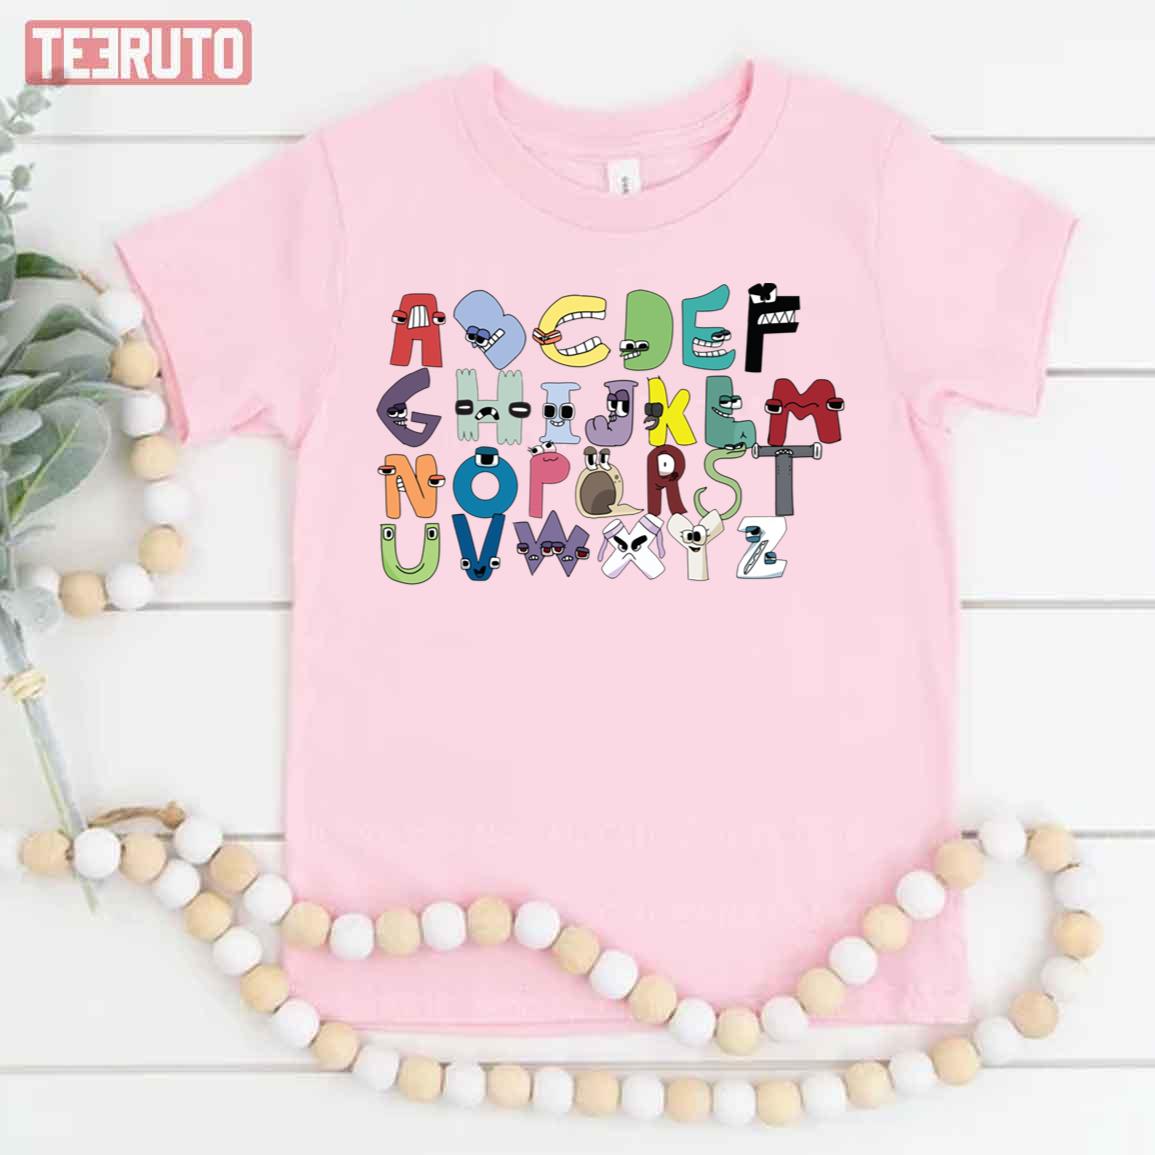 Latter L With Muscle Alphabet Lore Unisex T-Shirt - Teeruto